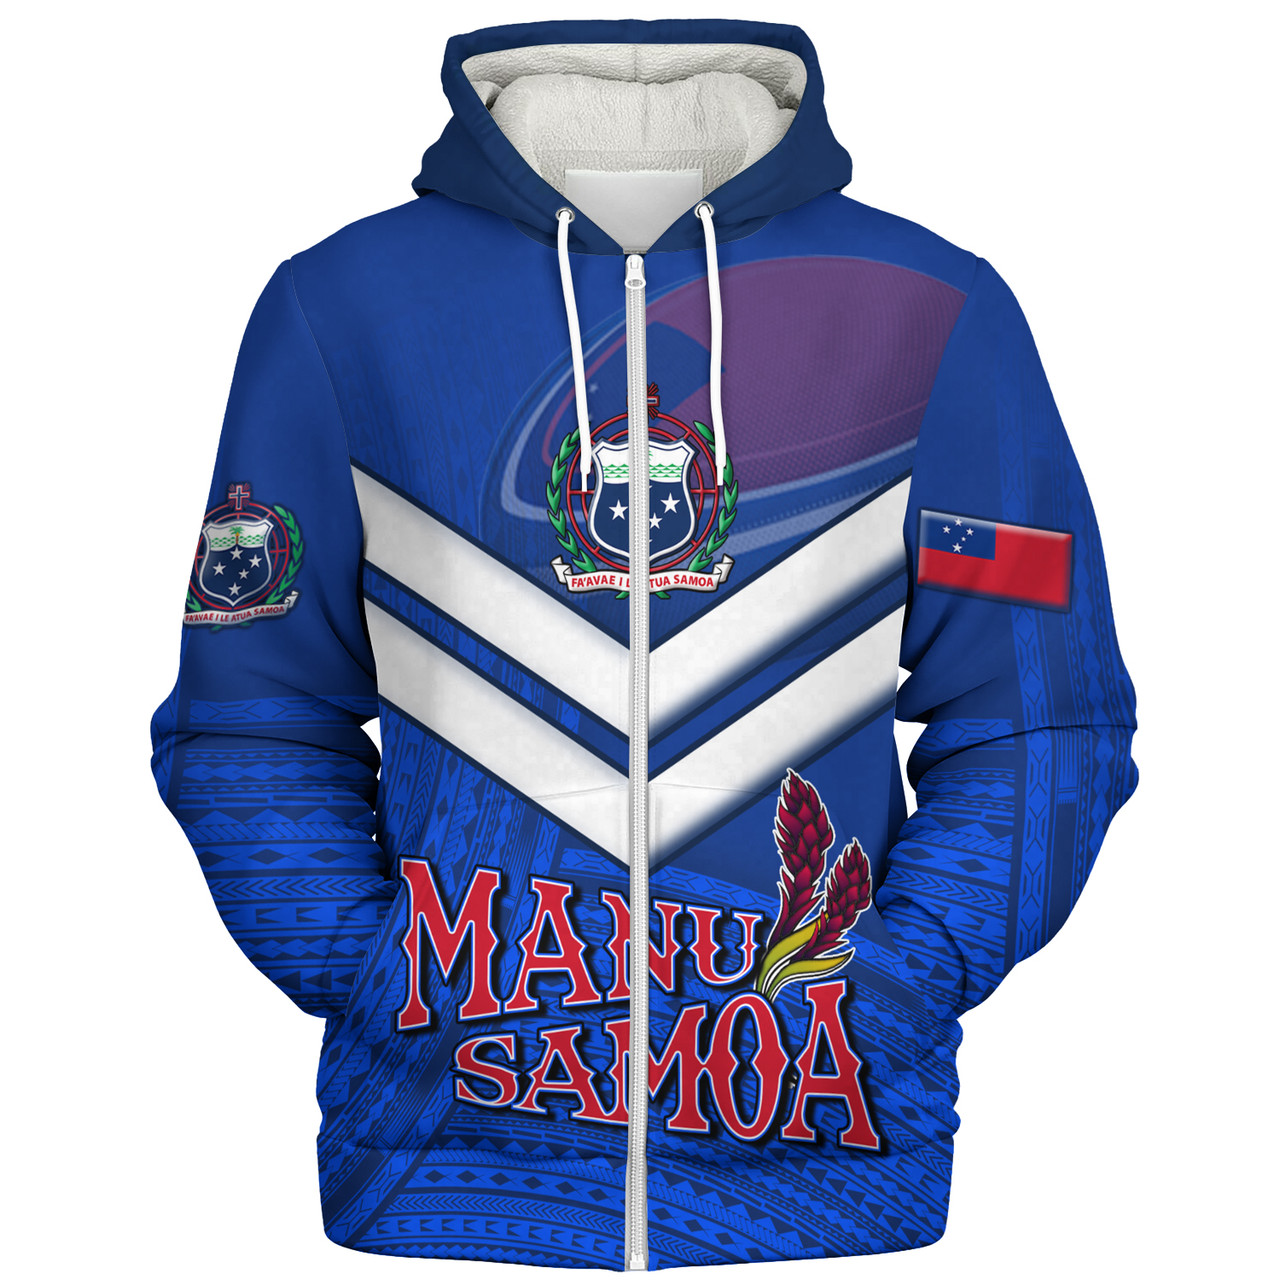 Samoa Sherpa Hoodie Samoa Tradition Patterns With Rugby Ball